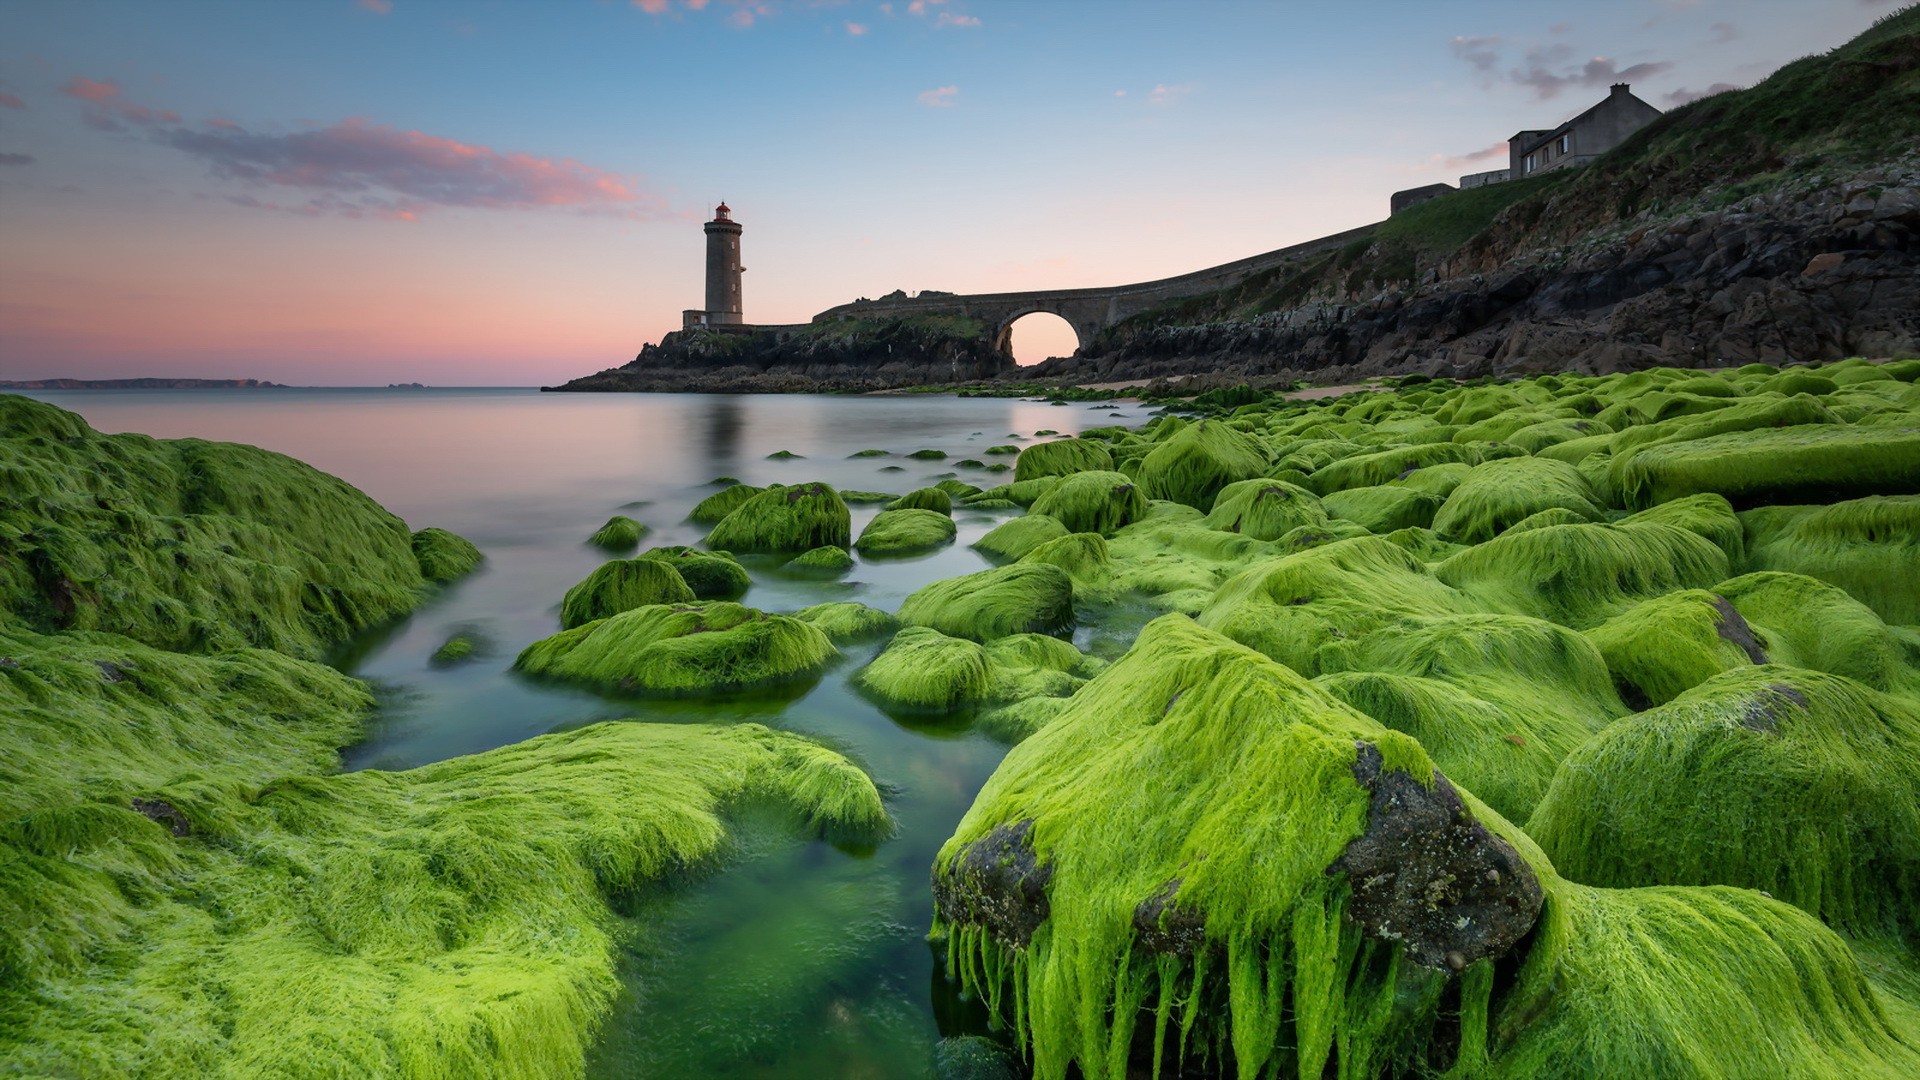 General 1920x1080 nature sea lighthouse moss shore plants outdoors